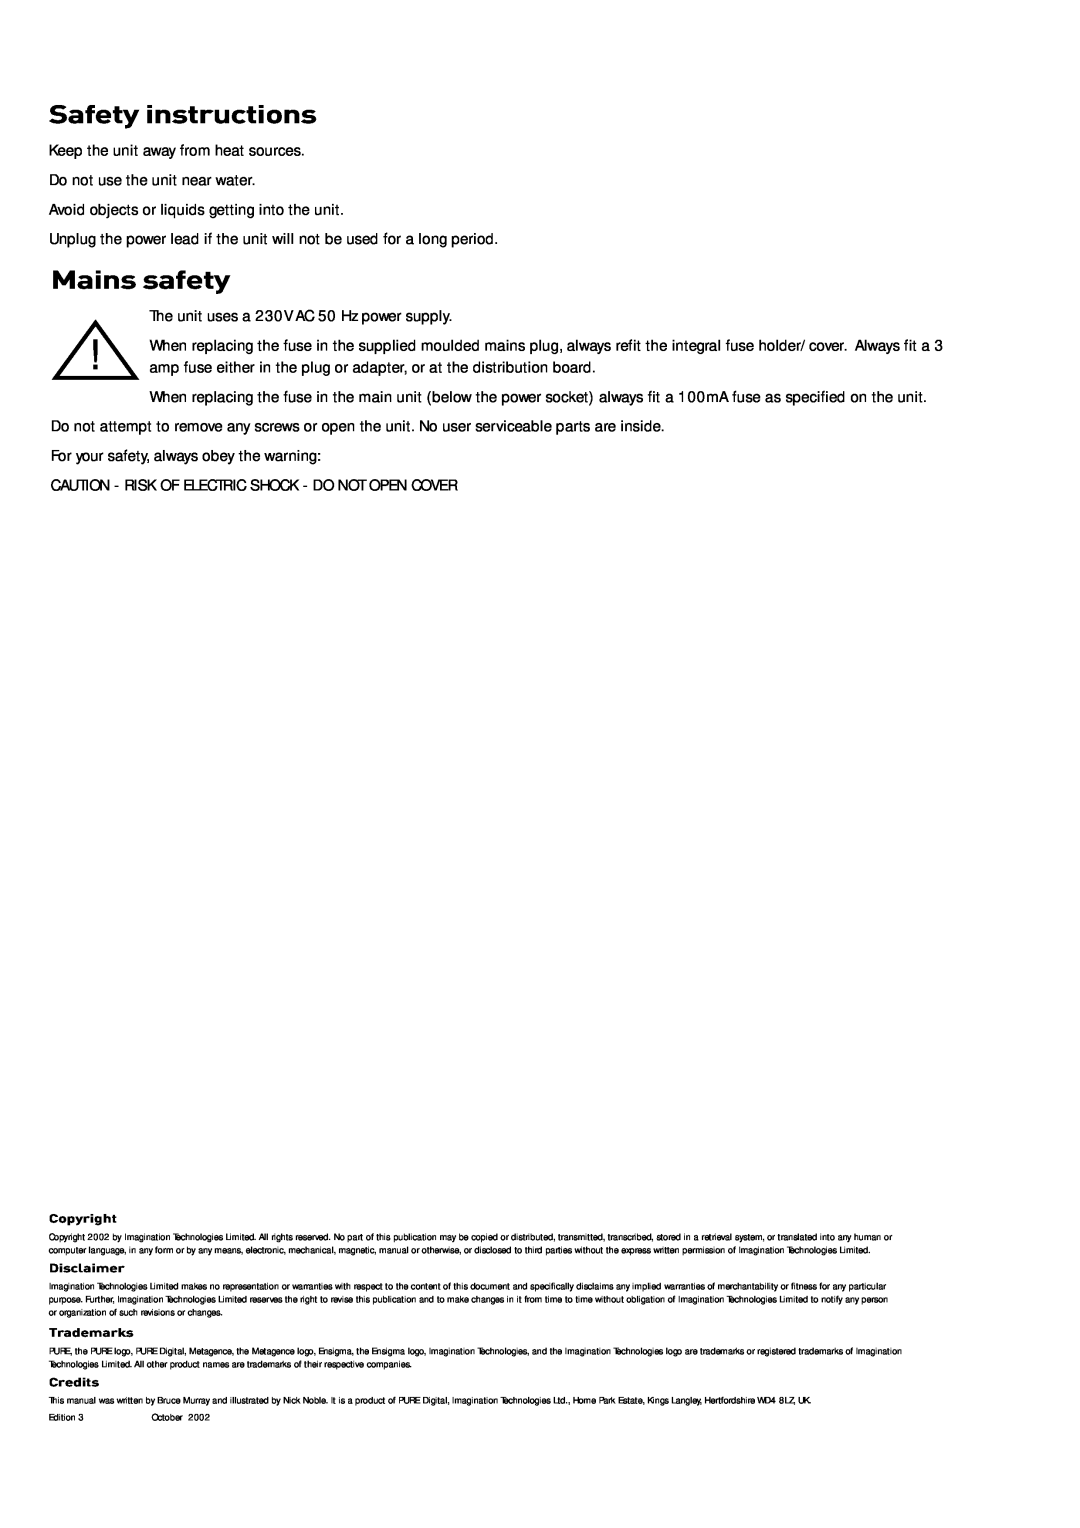 Cisco Systems DRX-701ES manual Safety instructions, Mains safety, Copyright, Disclaimer, Trademarks, Credits 